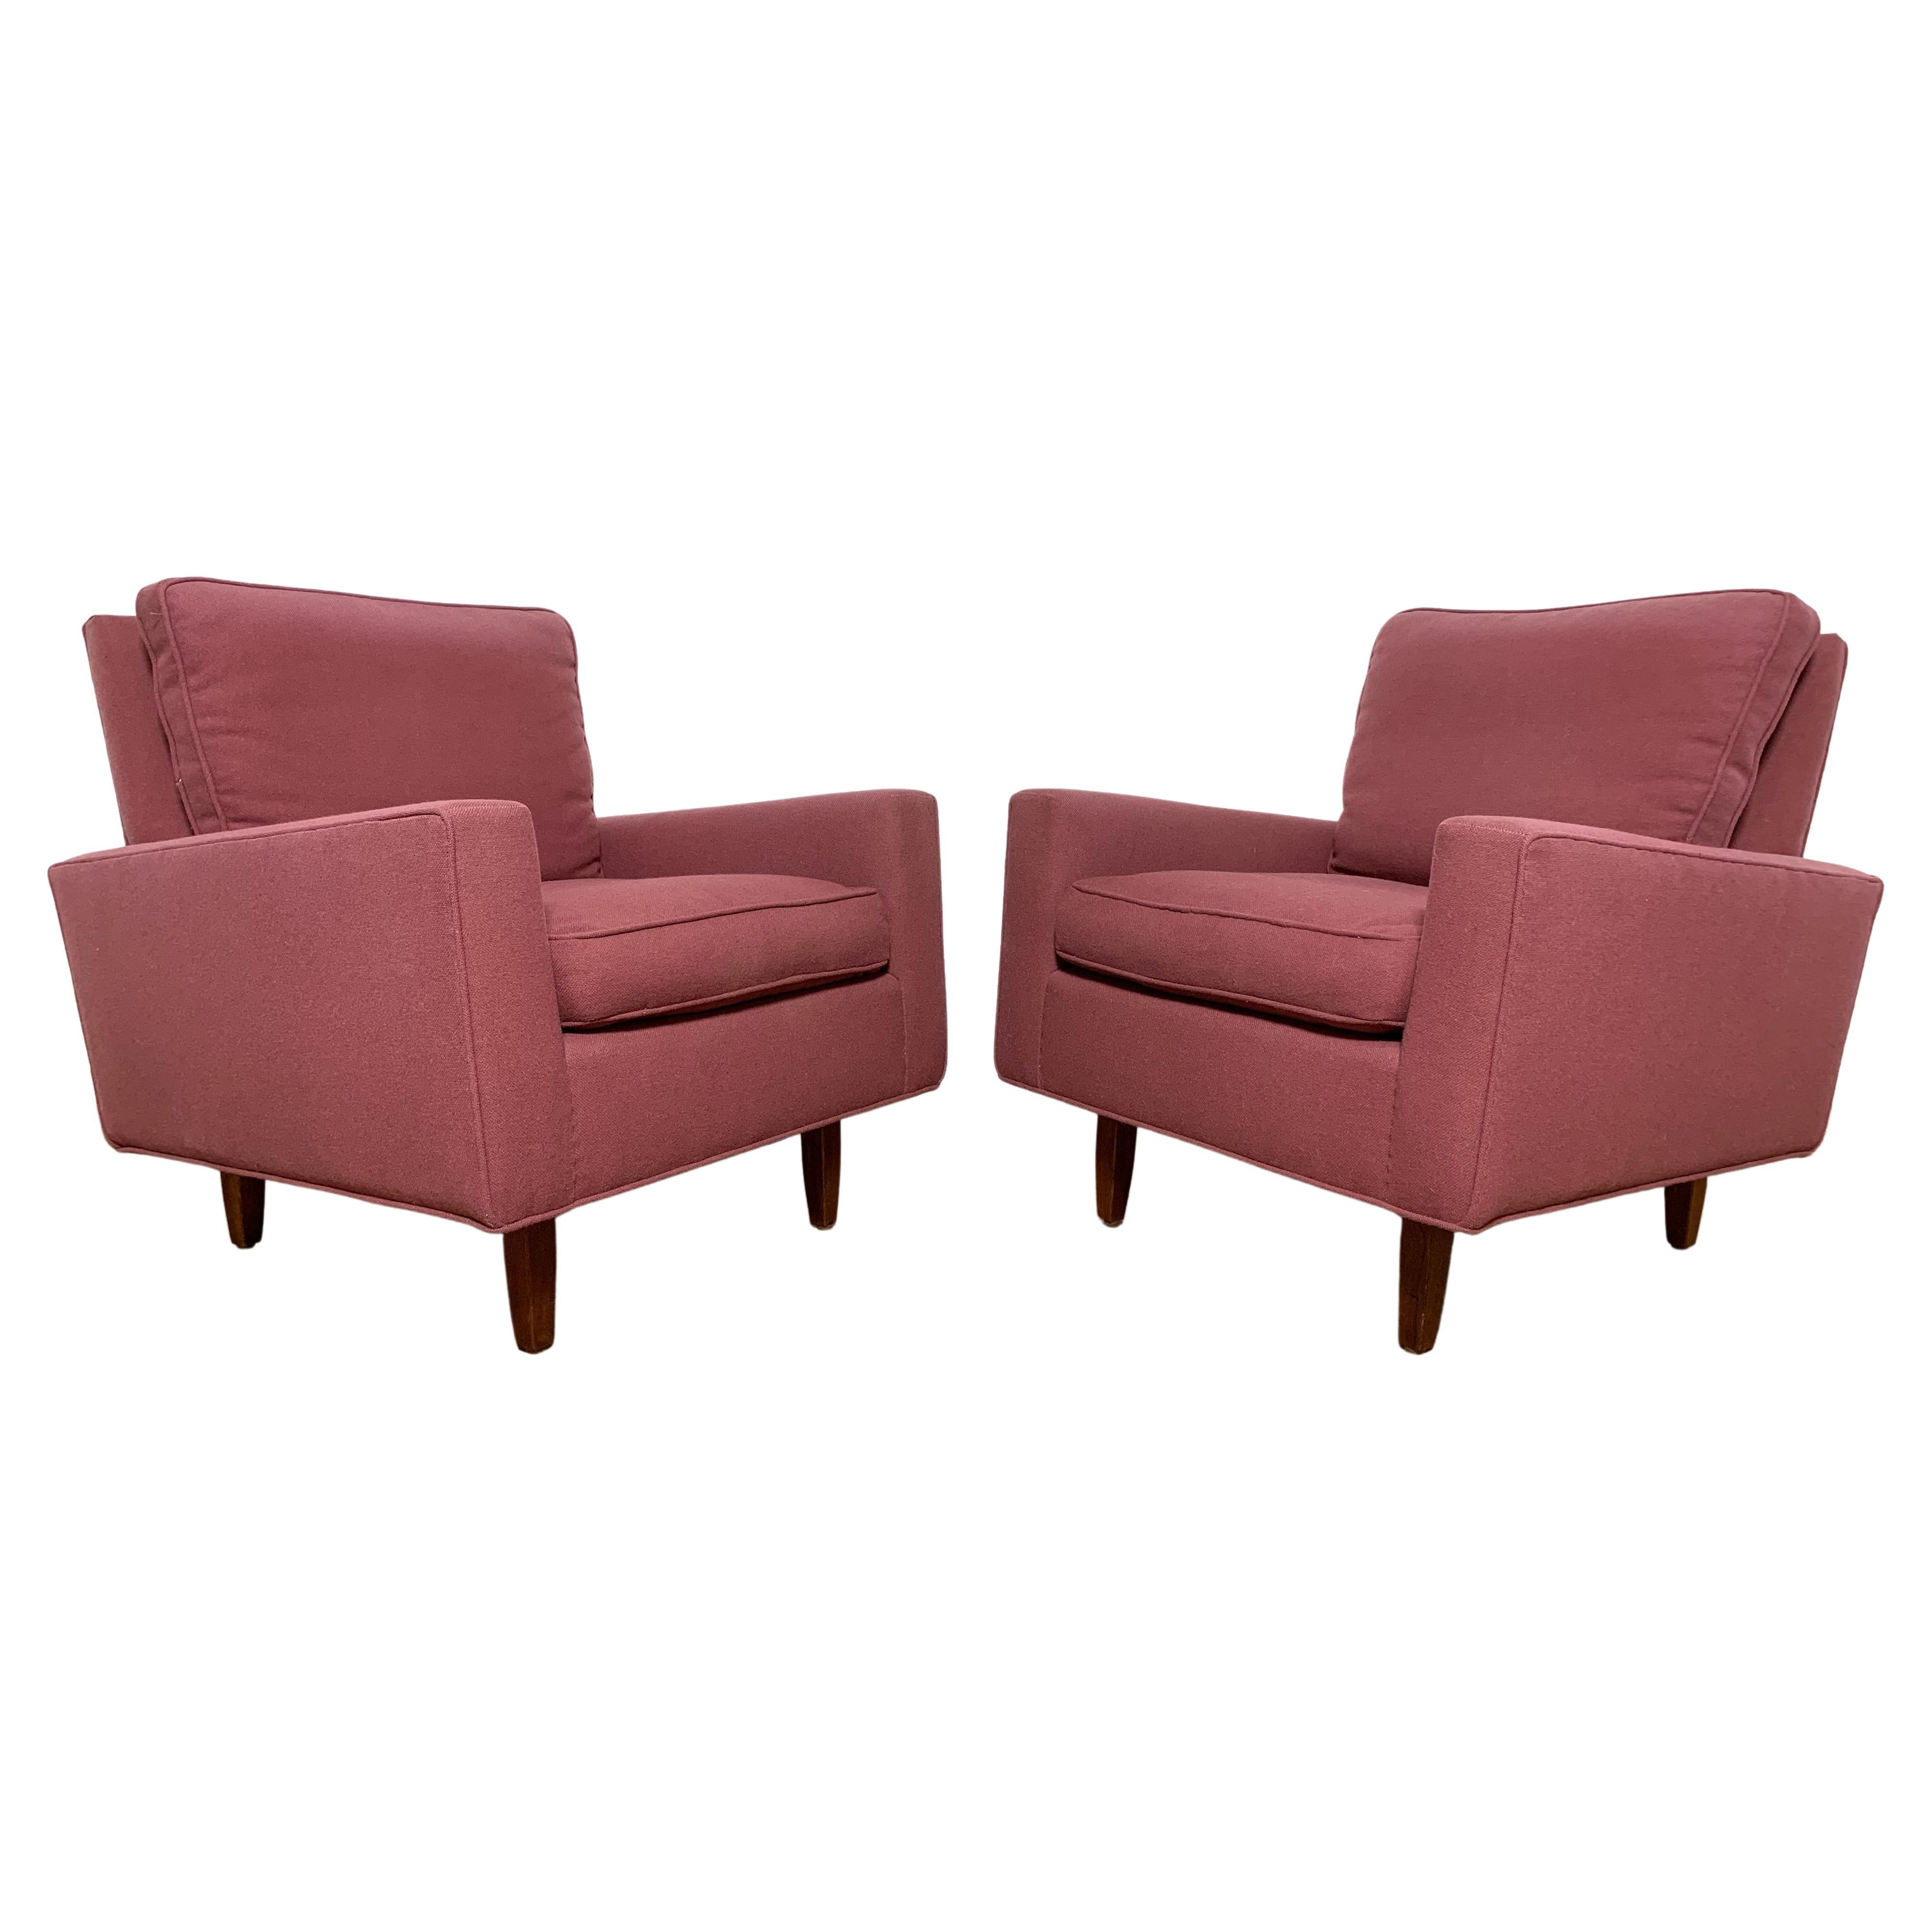 Pair of Florence Knoll Lounge Chairs Model 25 WD for Knoll, Circa 1970